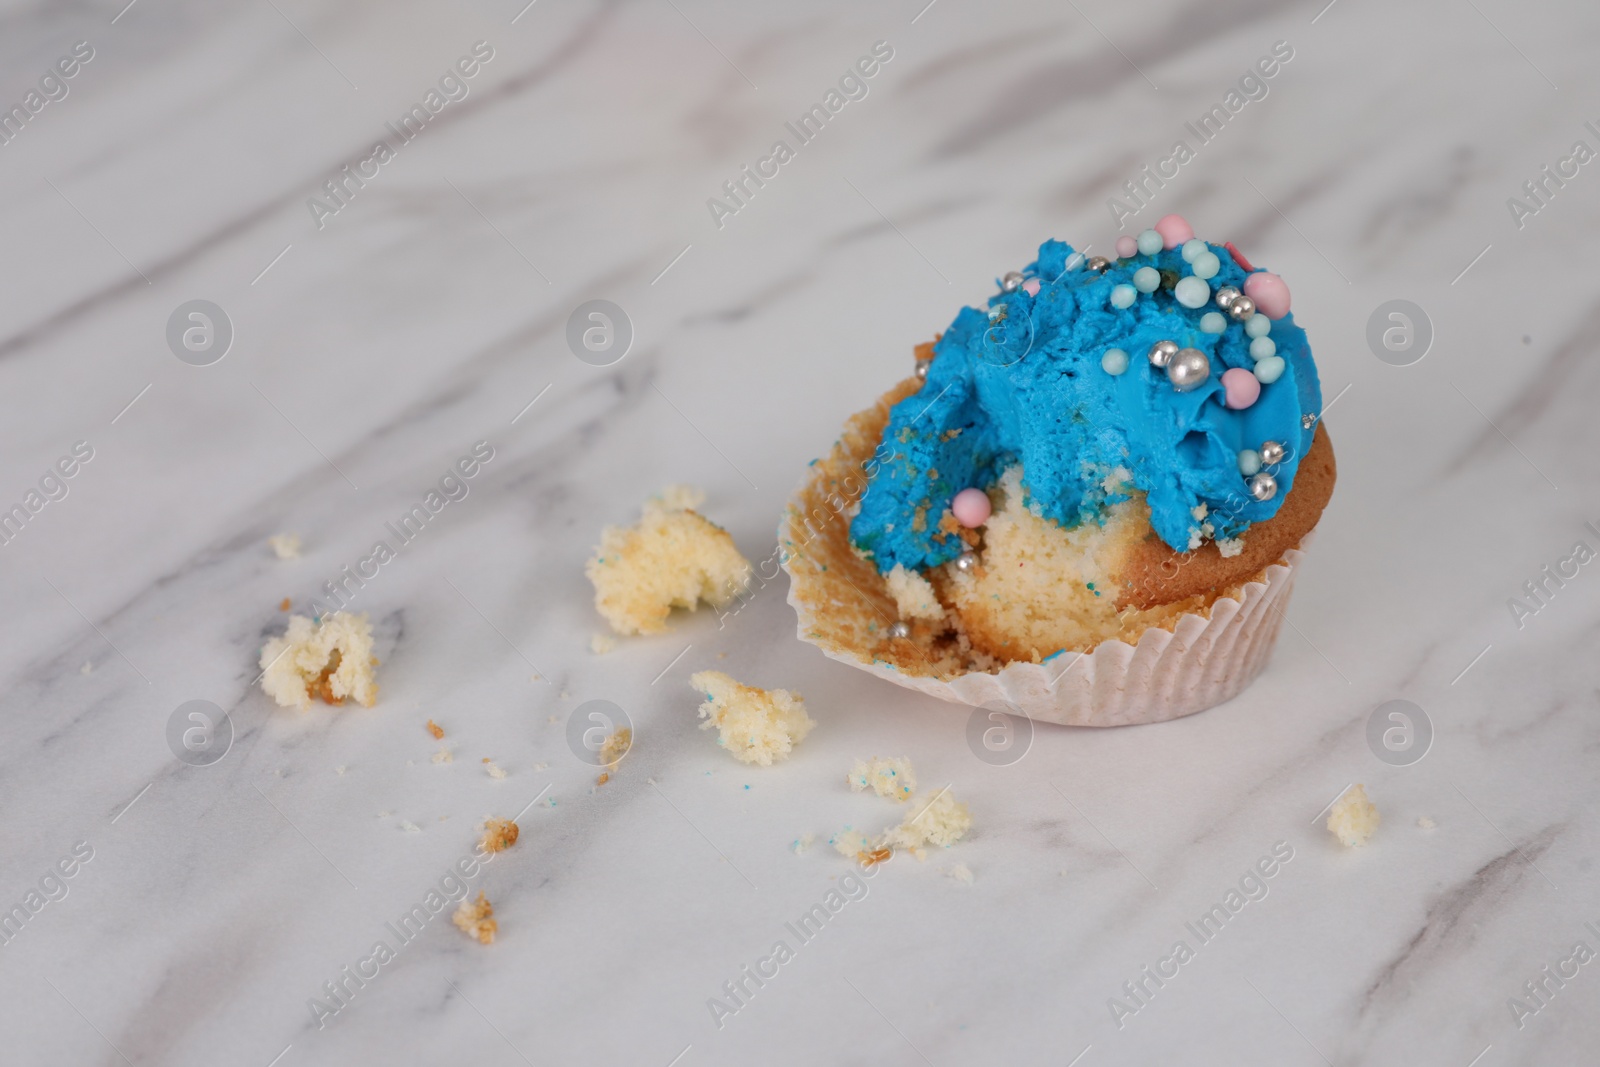 Photo of Failed cupcake with cream on light table. Troubles happen